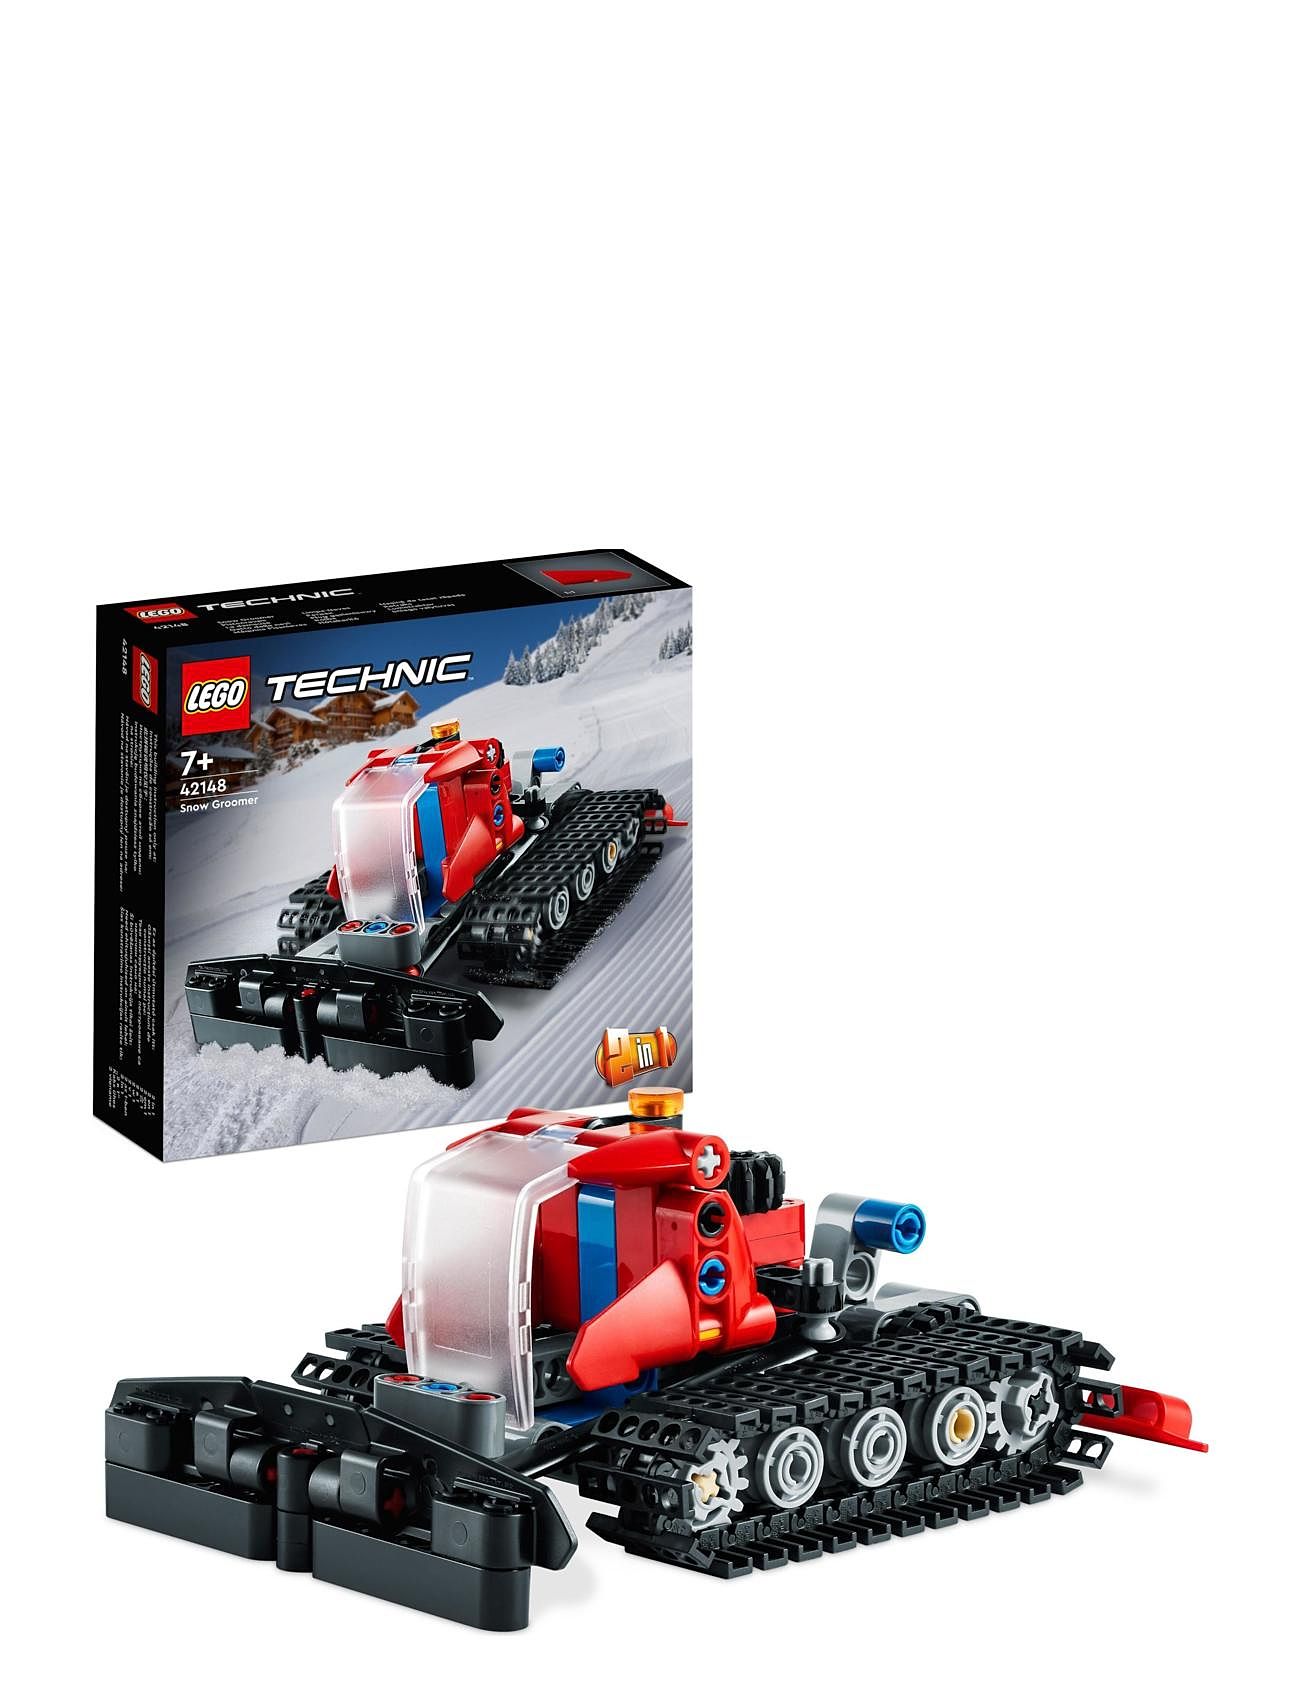 Snow Groomer 2In1 Vehicle Snowmobile Set Toys Lego Toys Lego® Technic Multi/patterned LEGO